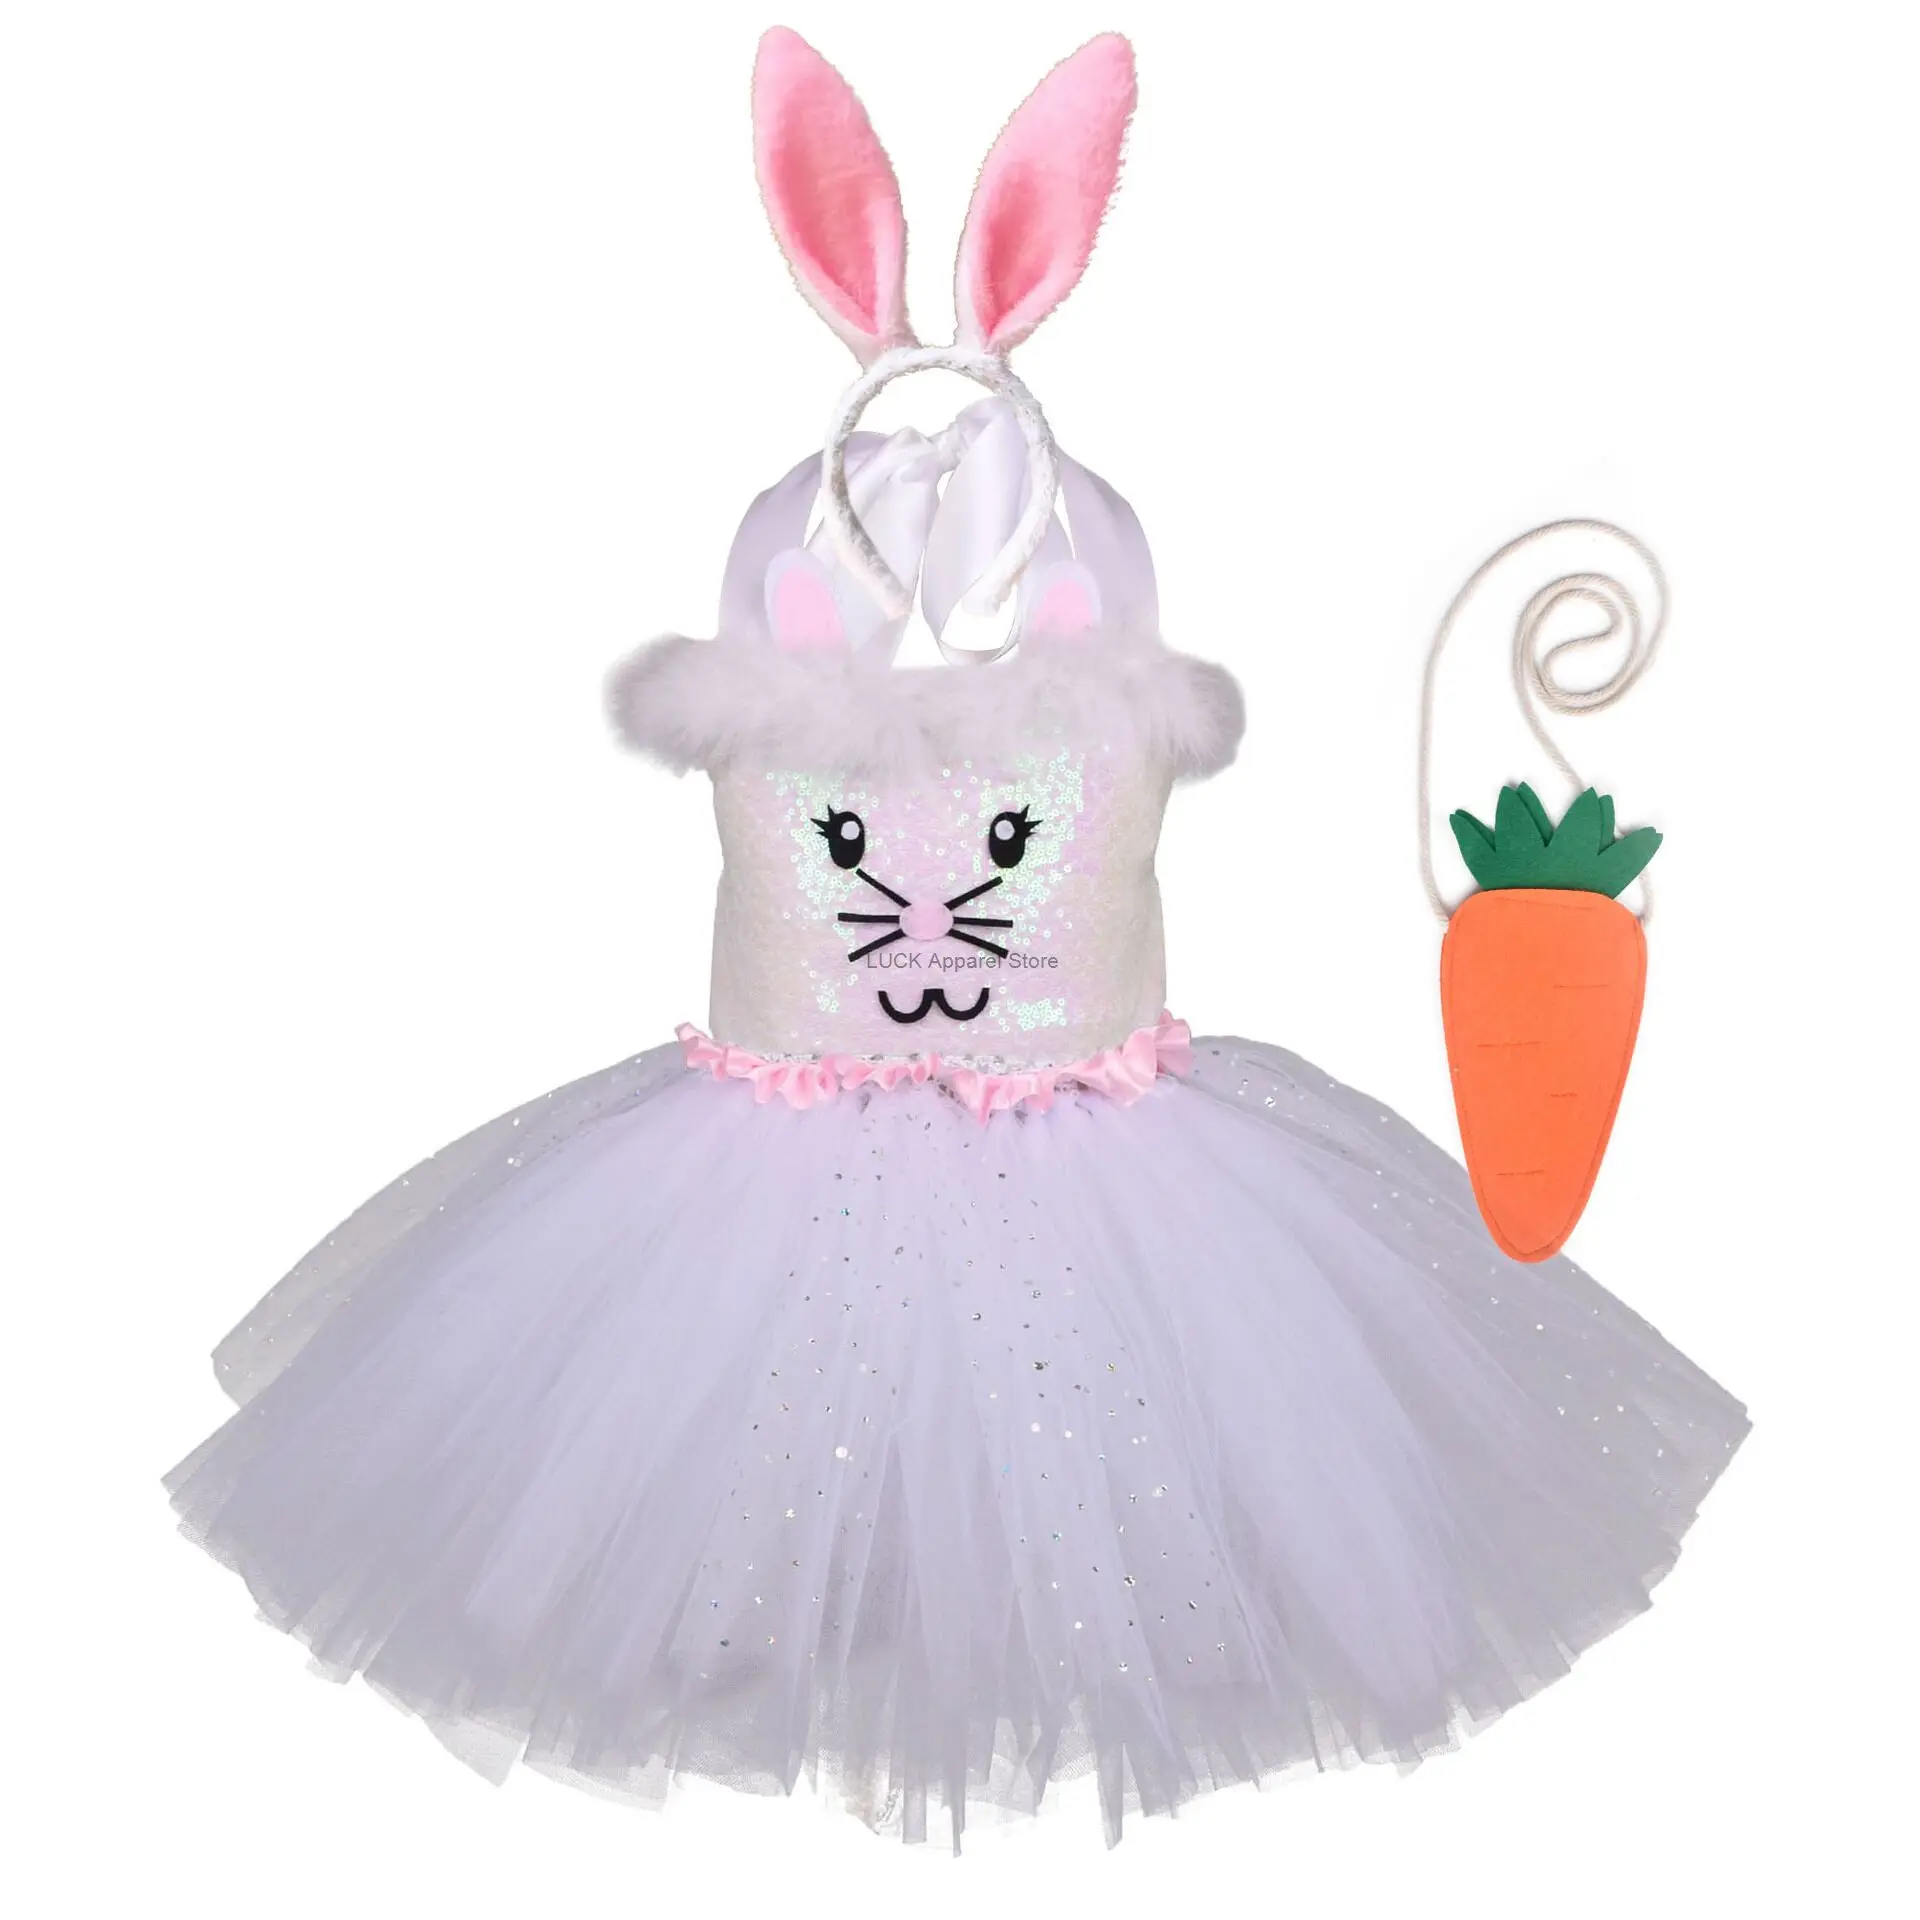 

Girl's Sequin Rabbit Fluffy Skirt Animal Role-playing Dresses Stage Performance Party Costume Tutu Skirt Halloween Easter